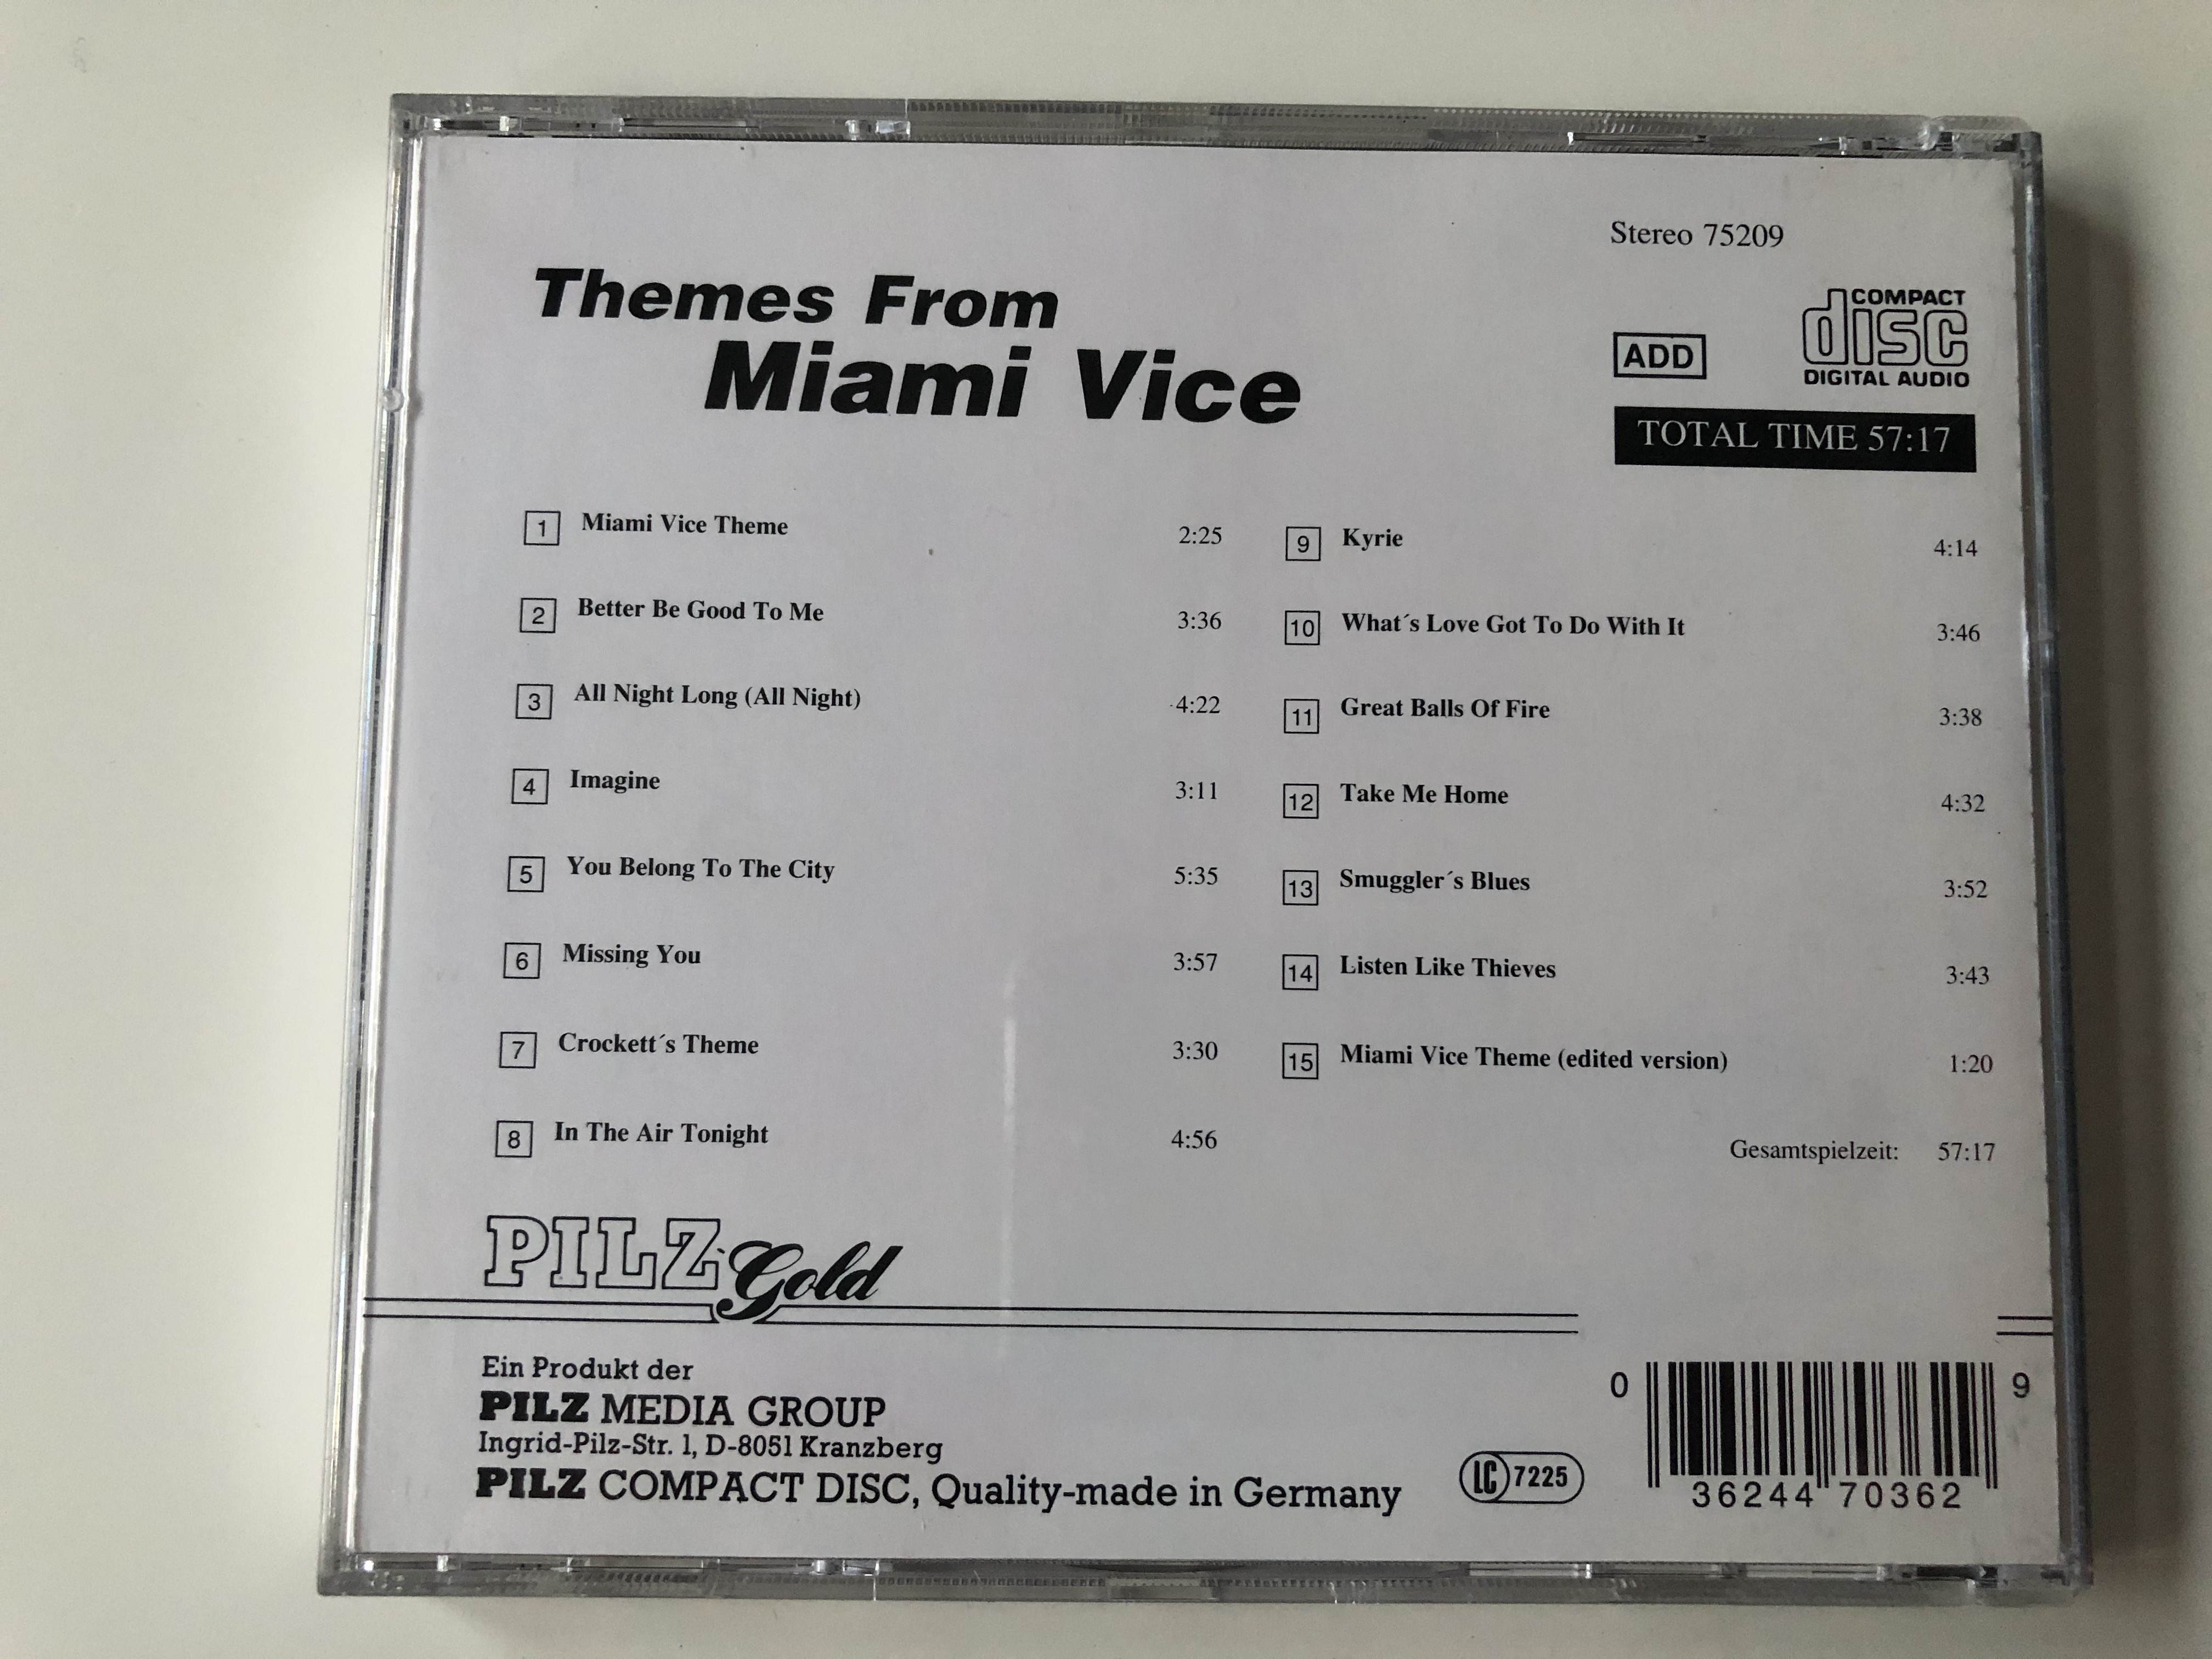 themes-from-miami-vice-incl.-miami-vice-theme-in-the-air-tonight-imagine-all-night-long-and-many-more-pilz-gold-audio-cd-stereo-75209-4-.jpg